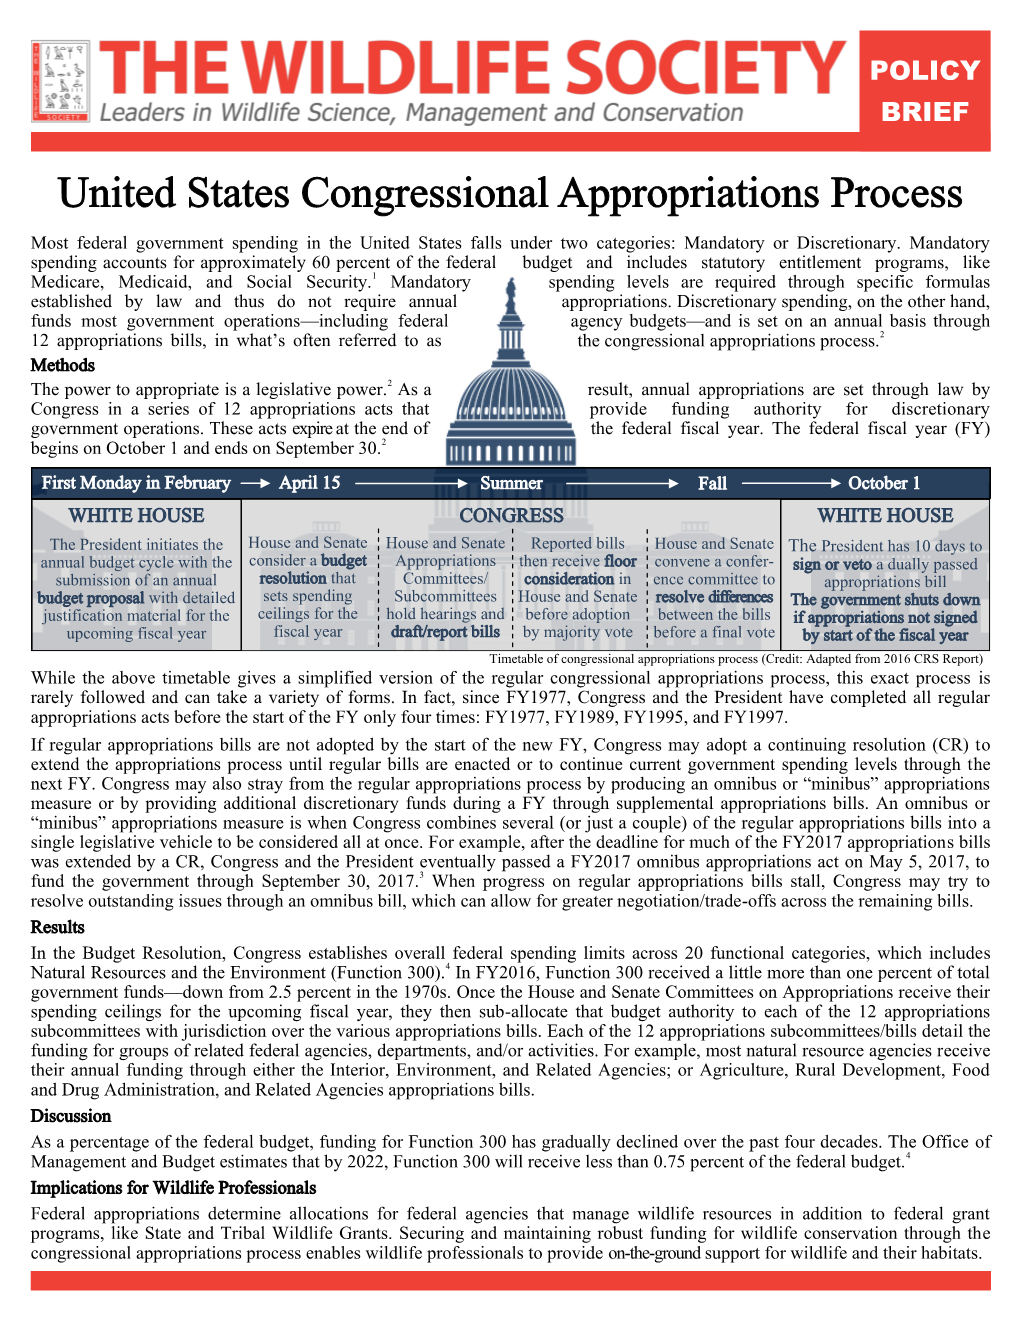 United States Congressional Appropriations Process Most Federal Government Spending in the United States Falls Under Two Categories: Mandatory Or Discretionary